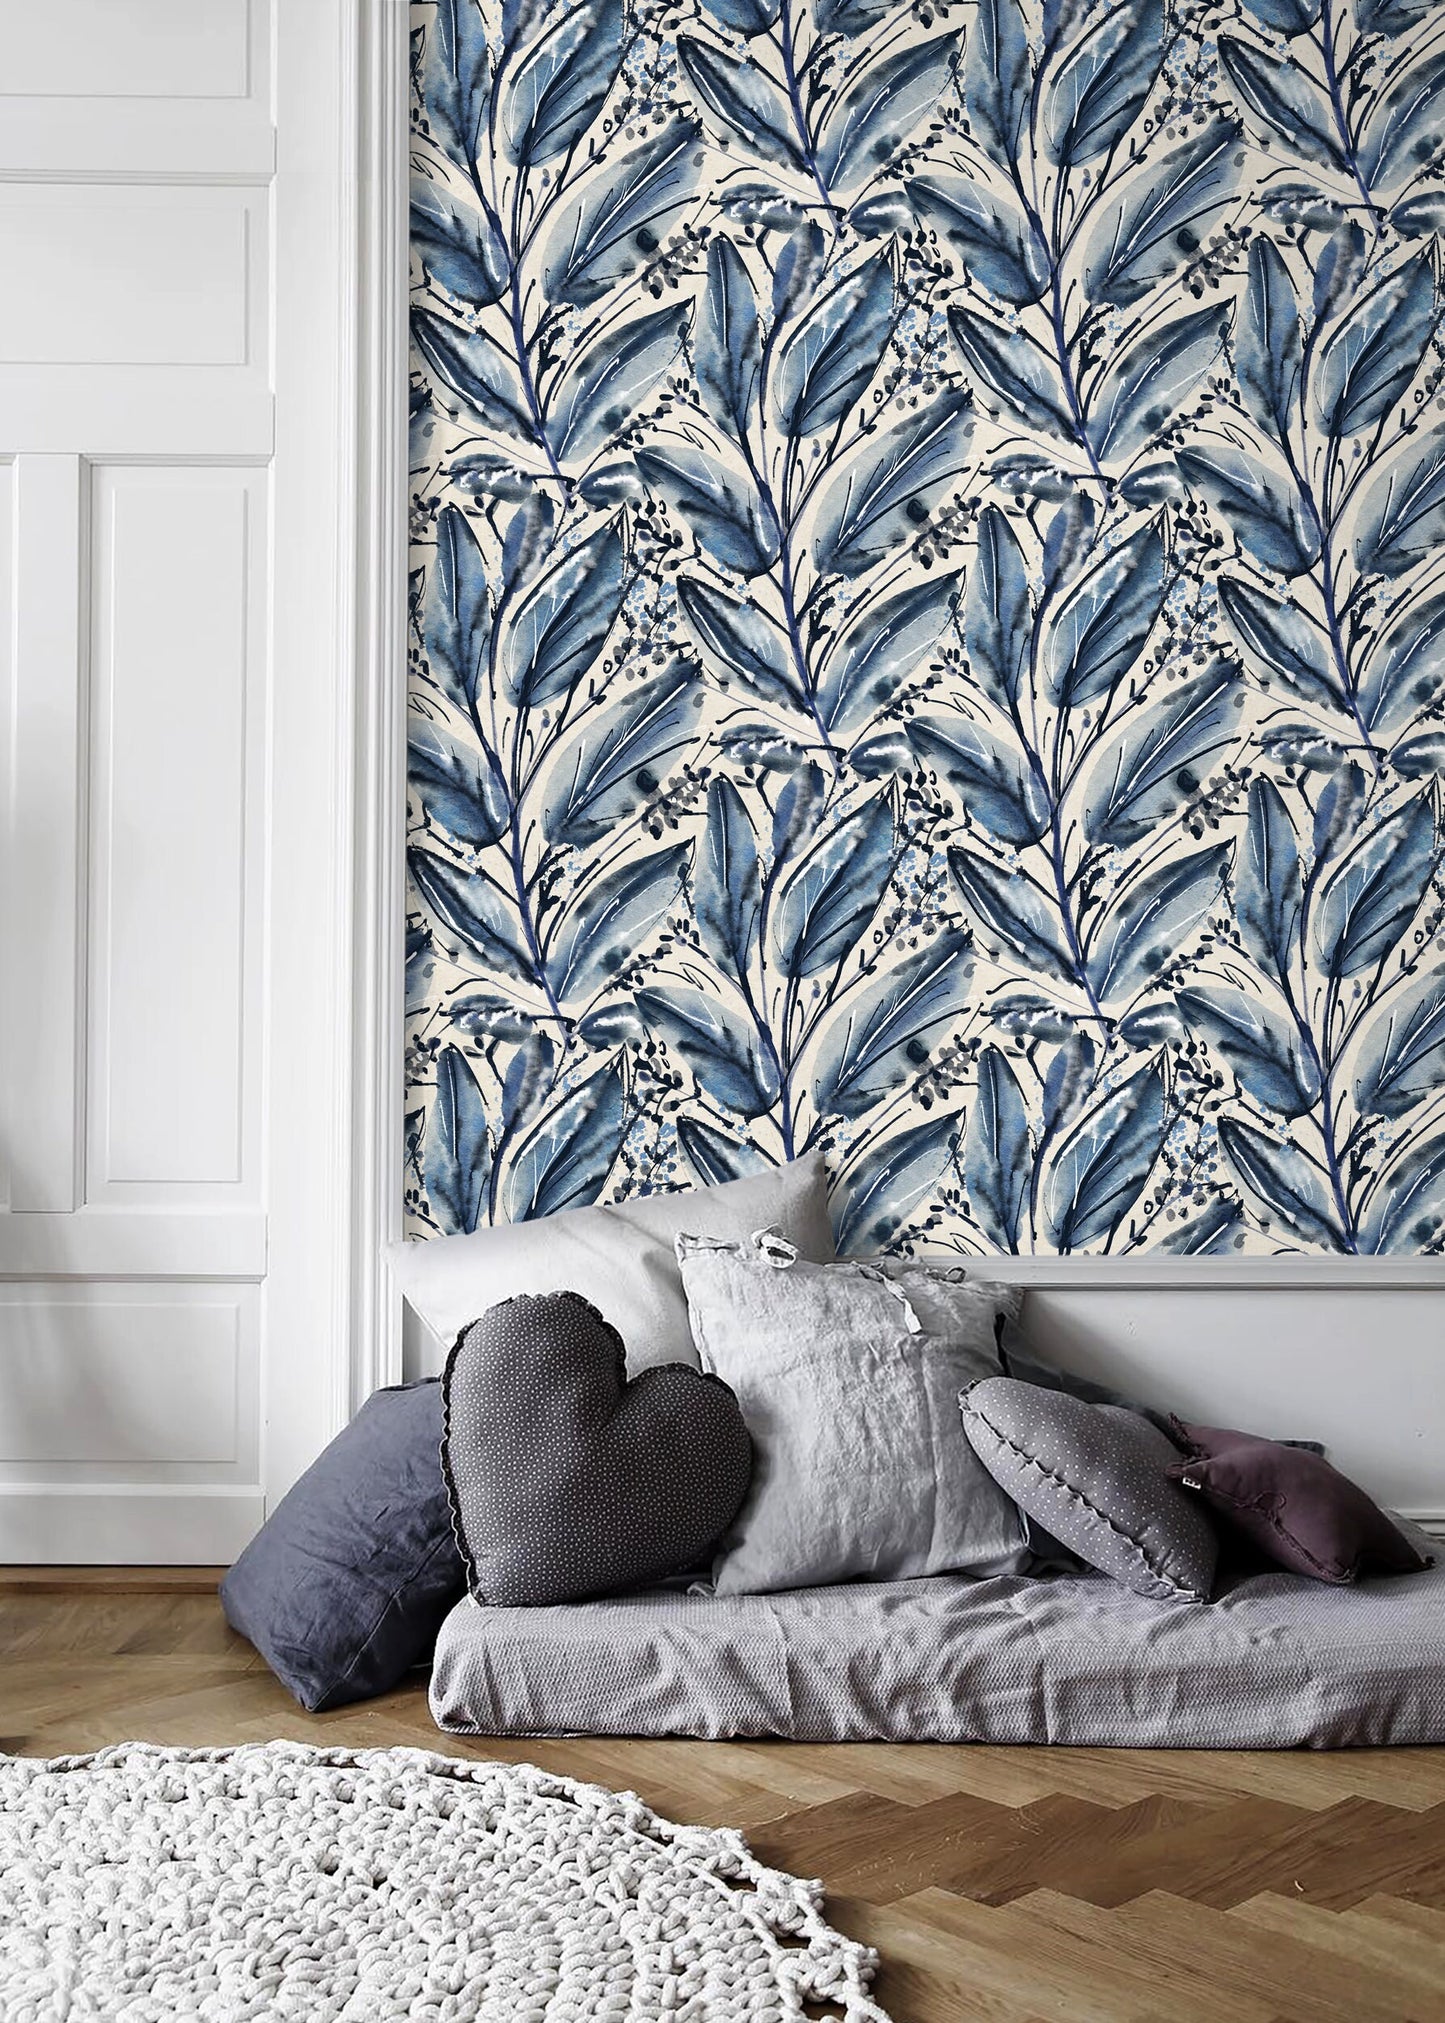 Blue Leaf Hand Painted Wallpaper / Wallpaper Peel and Stick Wallpaper Removable Wallpaper Home Decor Wall Art Wall Decor Room Decor - C780